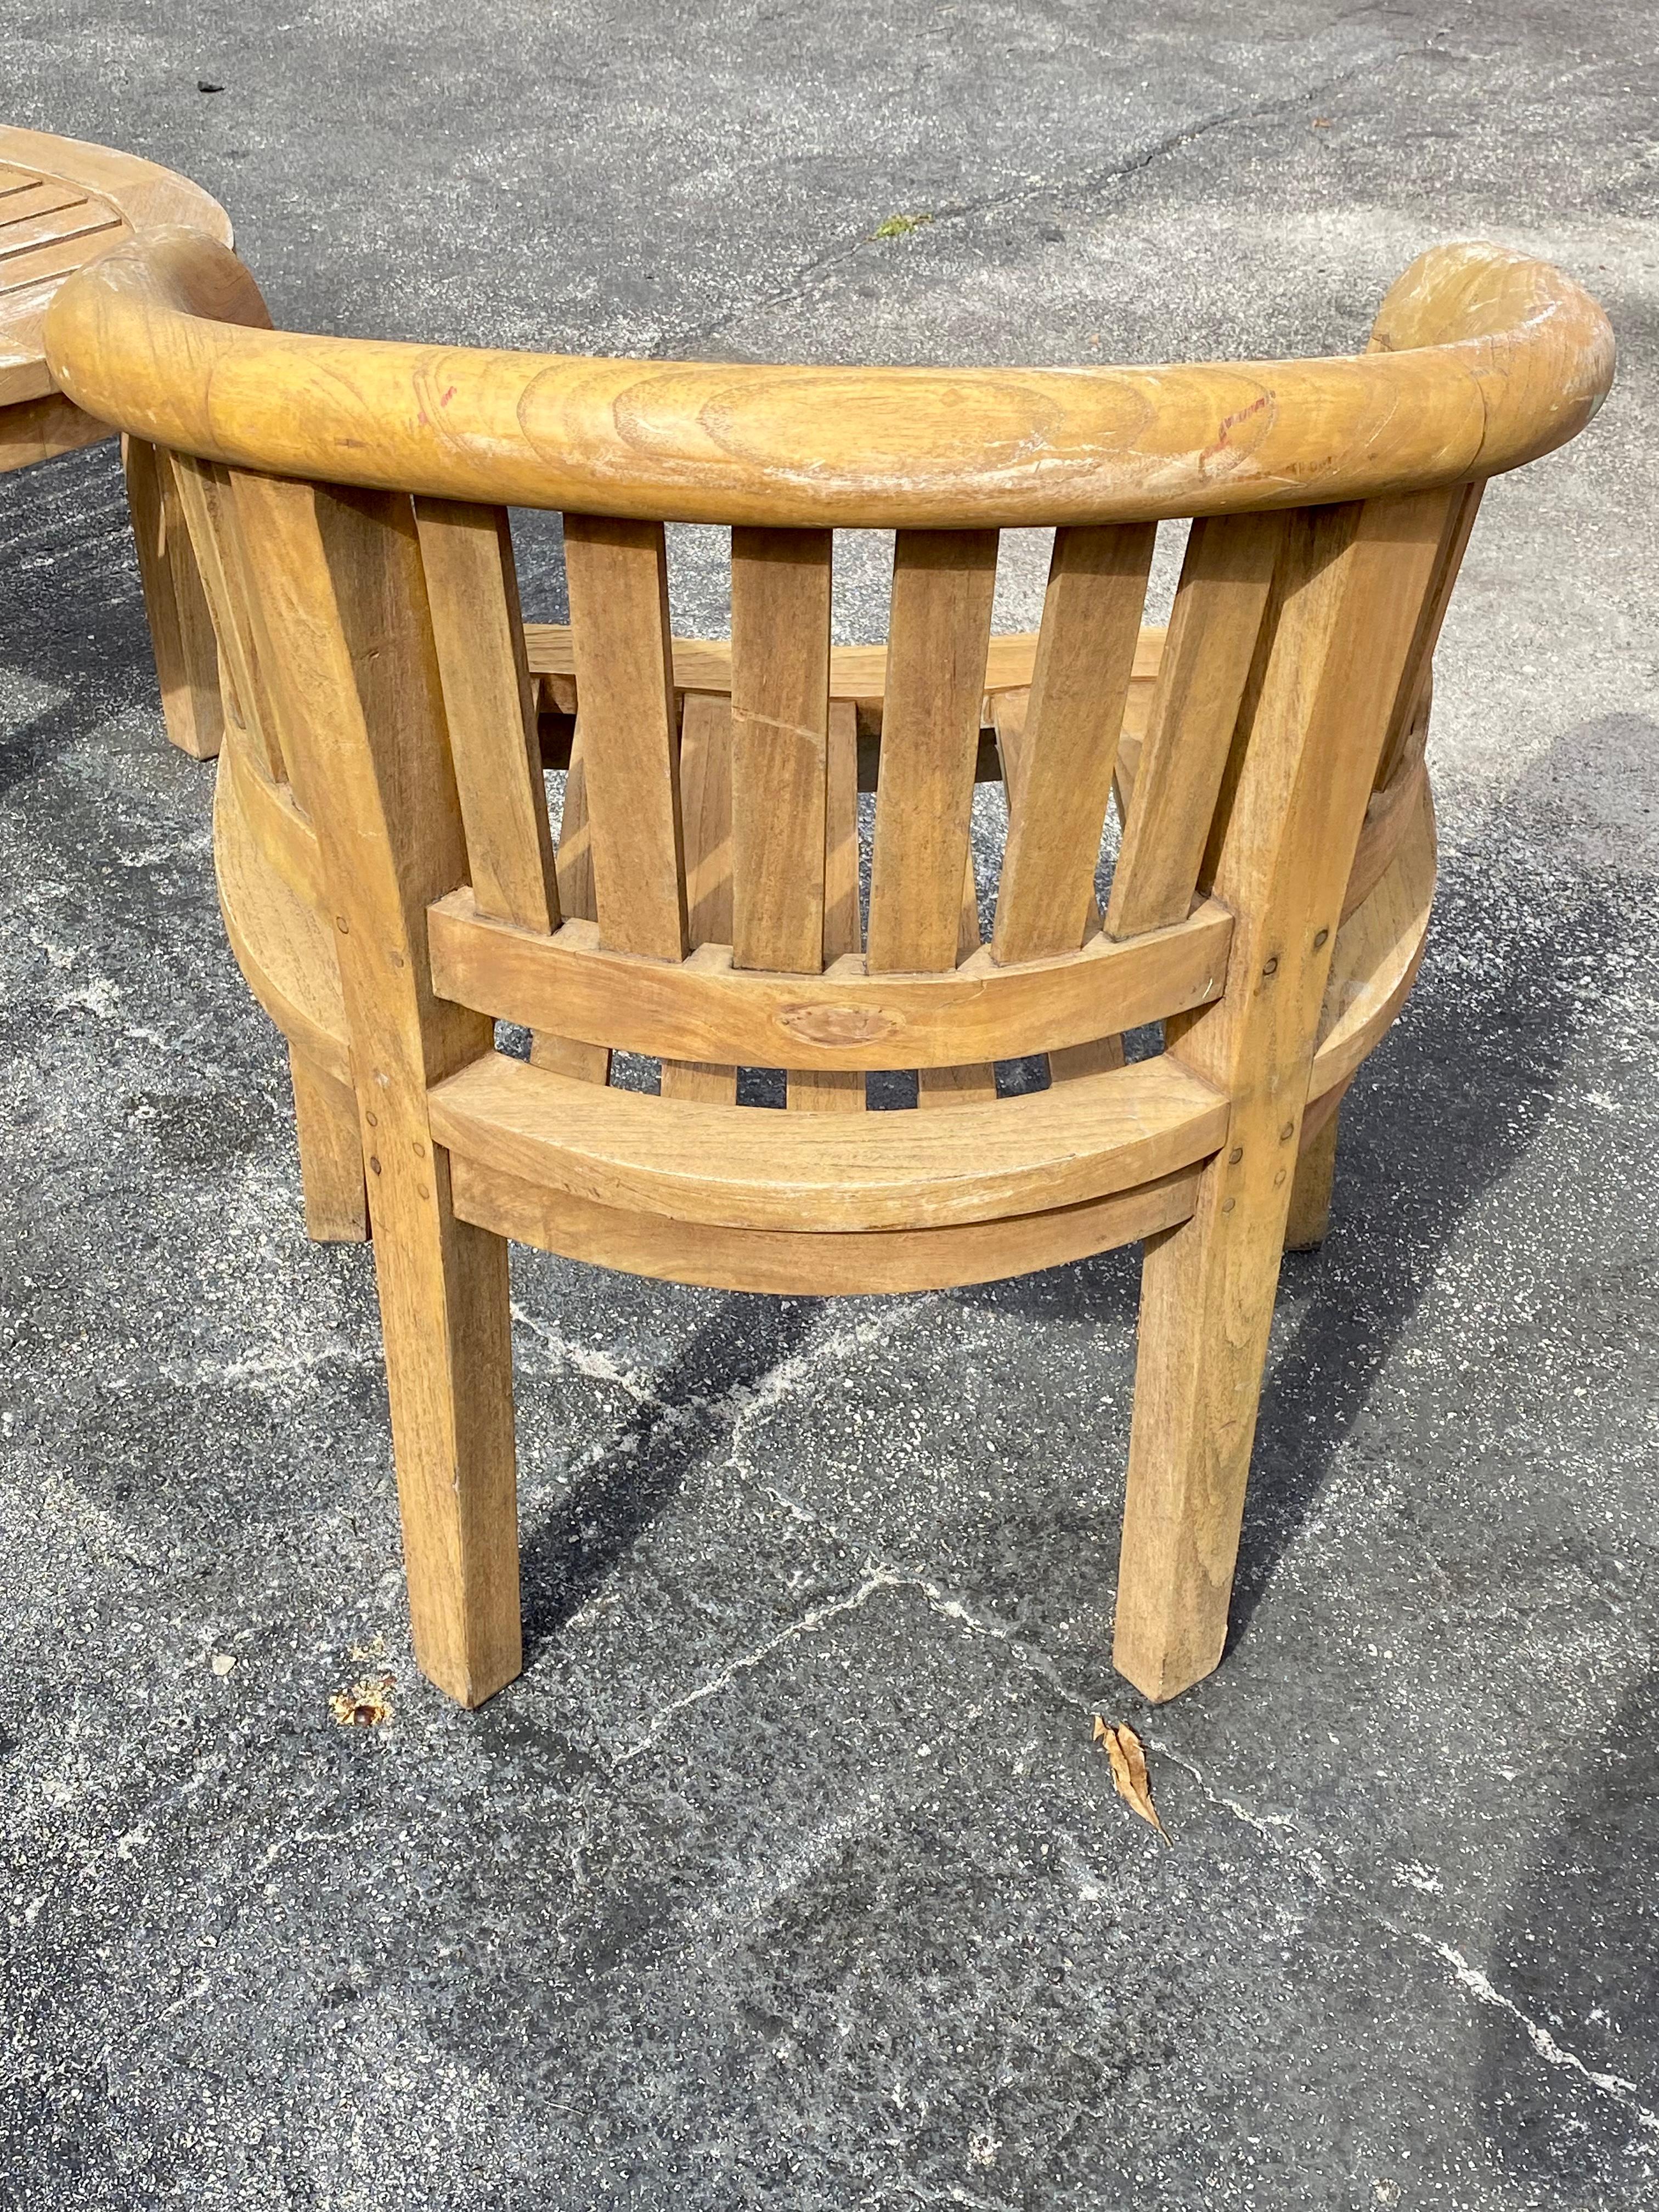 1970s Teak Curved Barrel Kidney Slatted Settee Table Chairs, Set of 4 For Sale 4